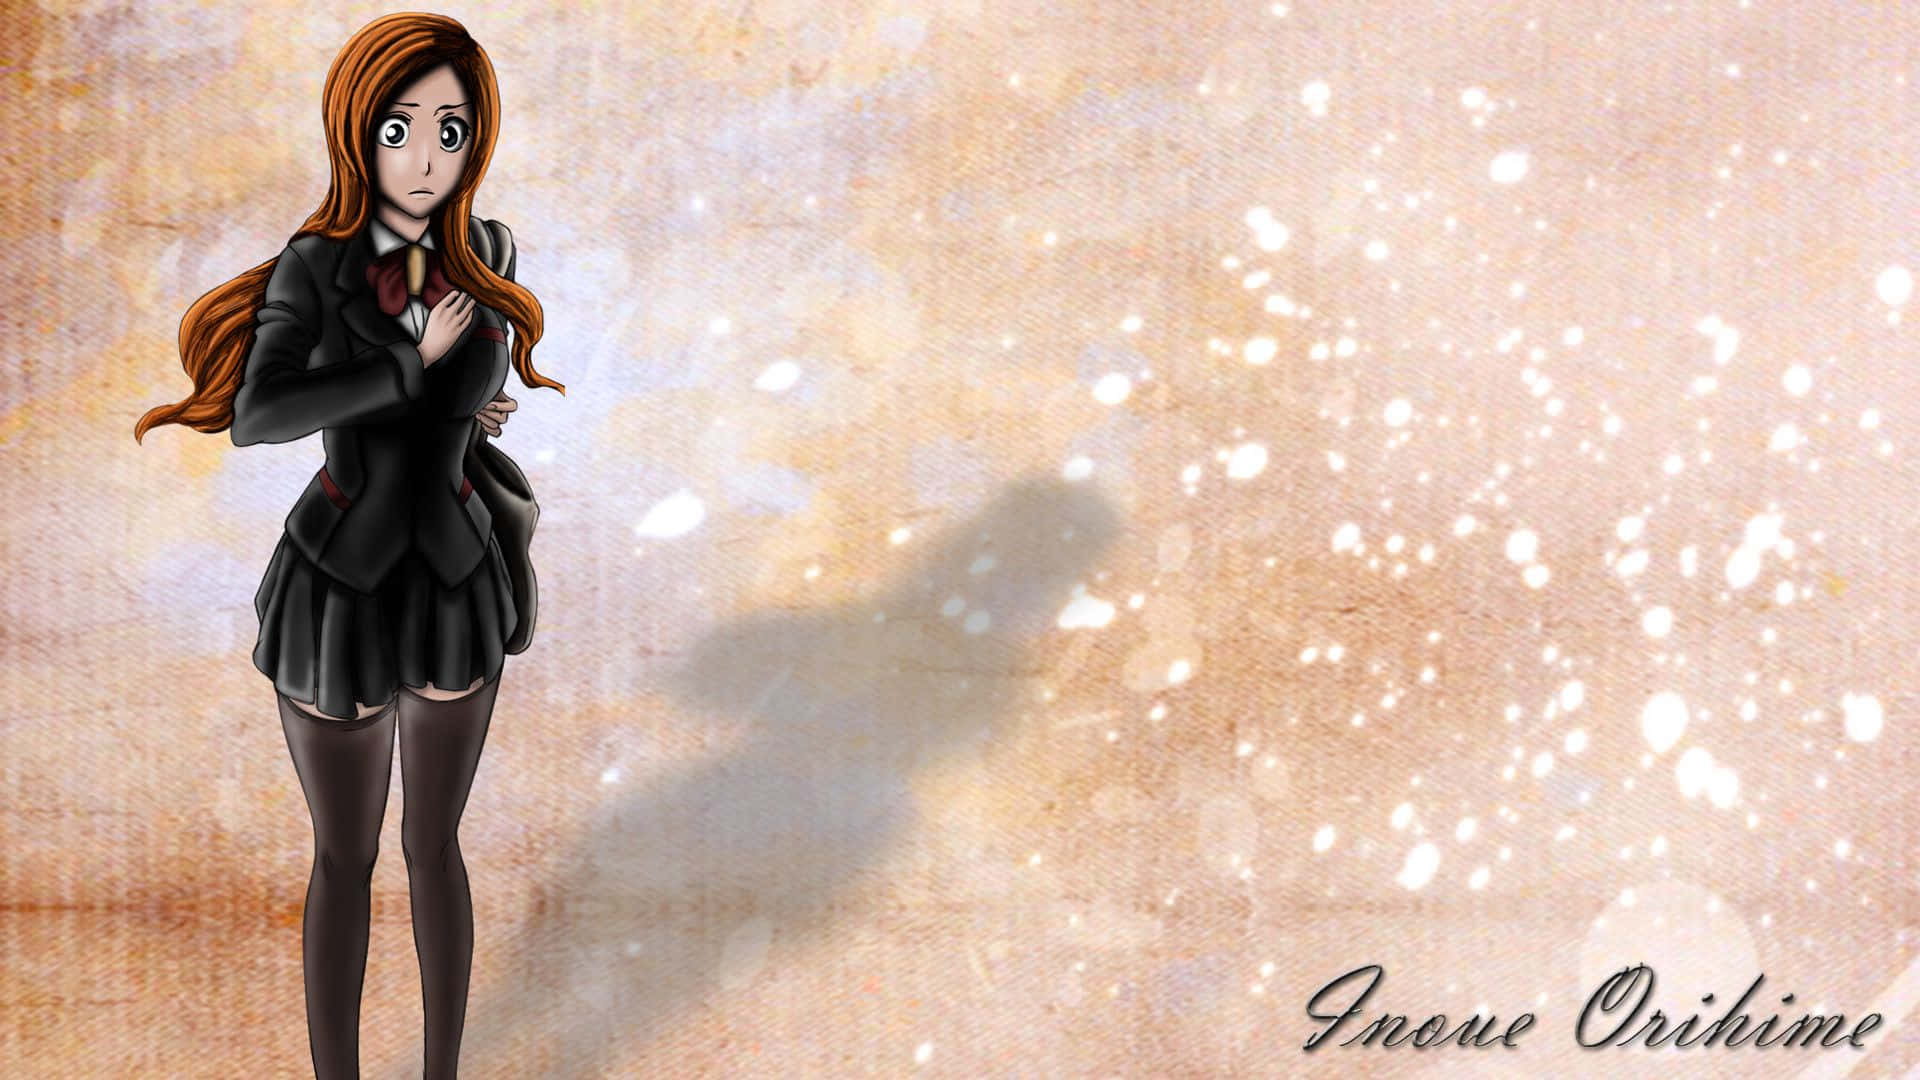 Orihime Inoue, a beloved Bleach character with a strong sense of justice Wallpaper